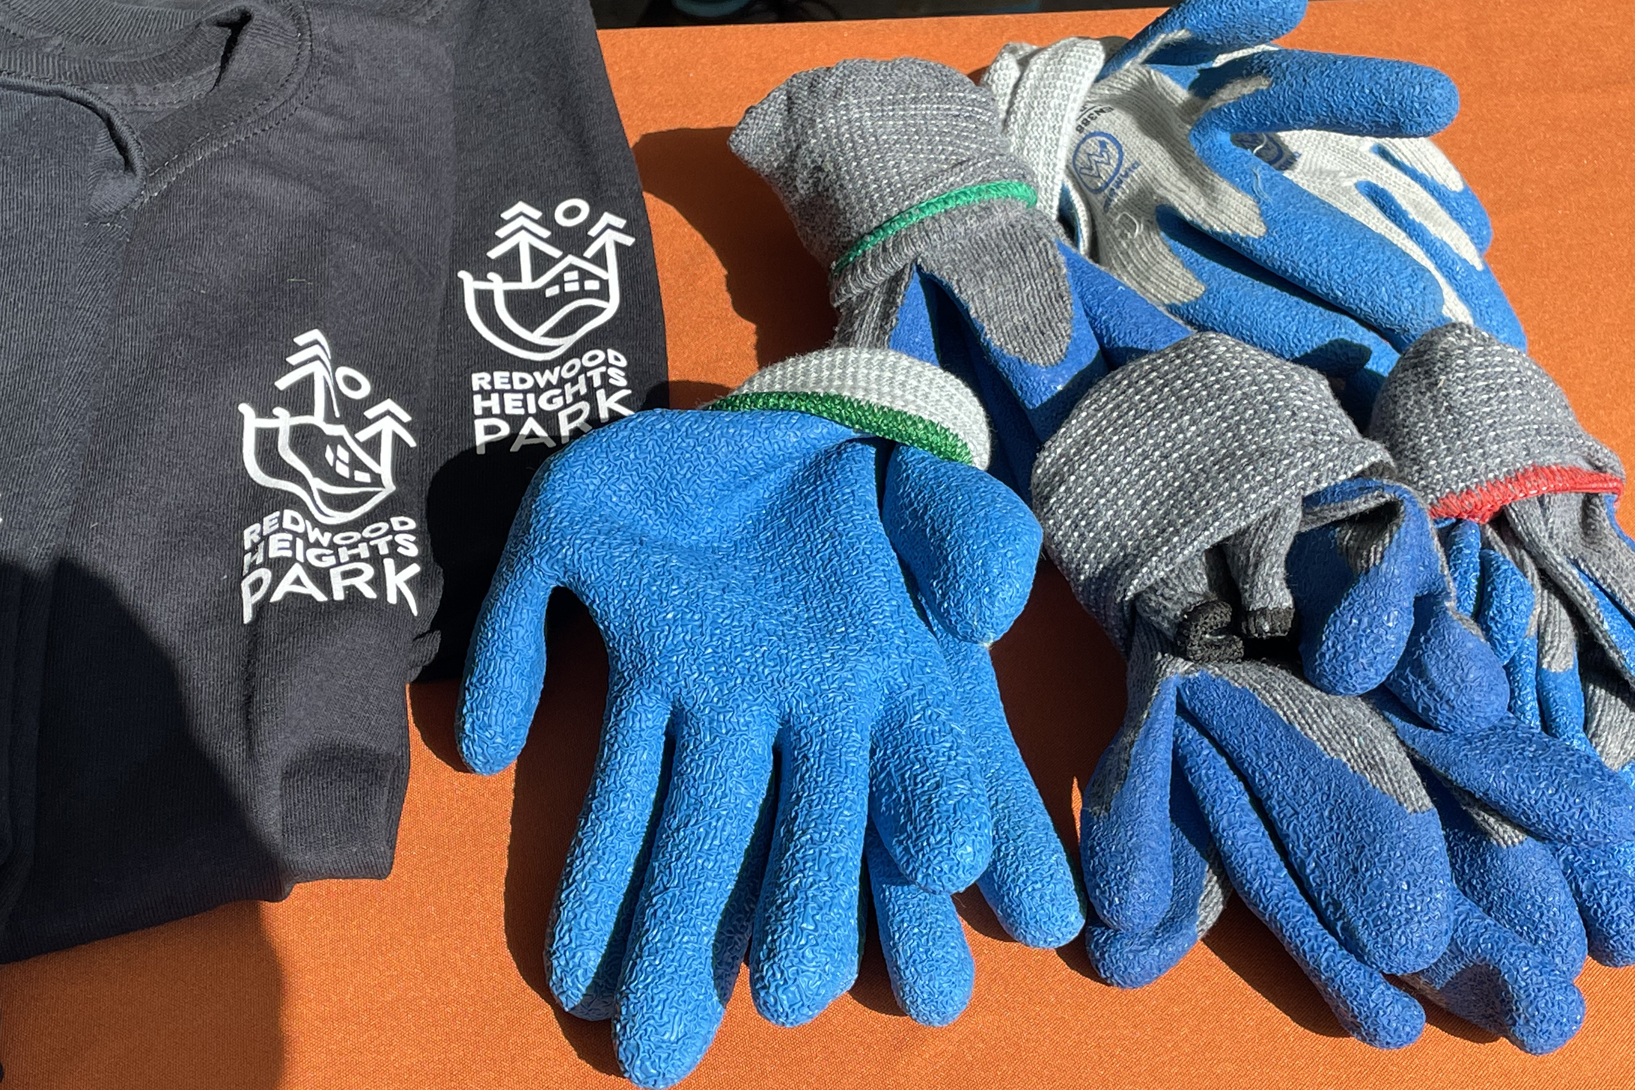 RHA Events: Redwood Heights Park shirts and work gloves for an Earth Day event